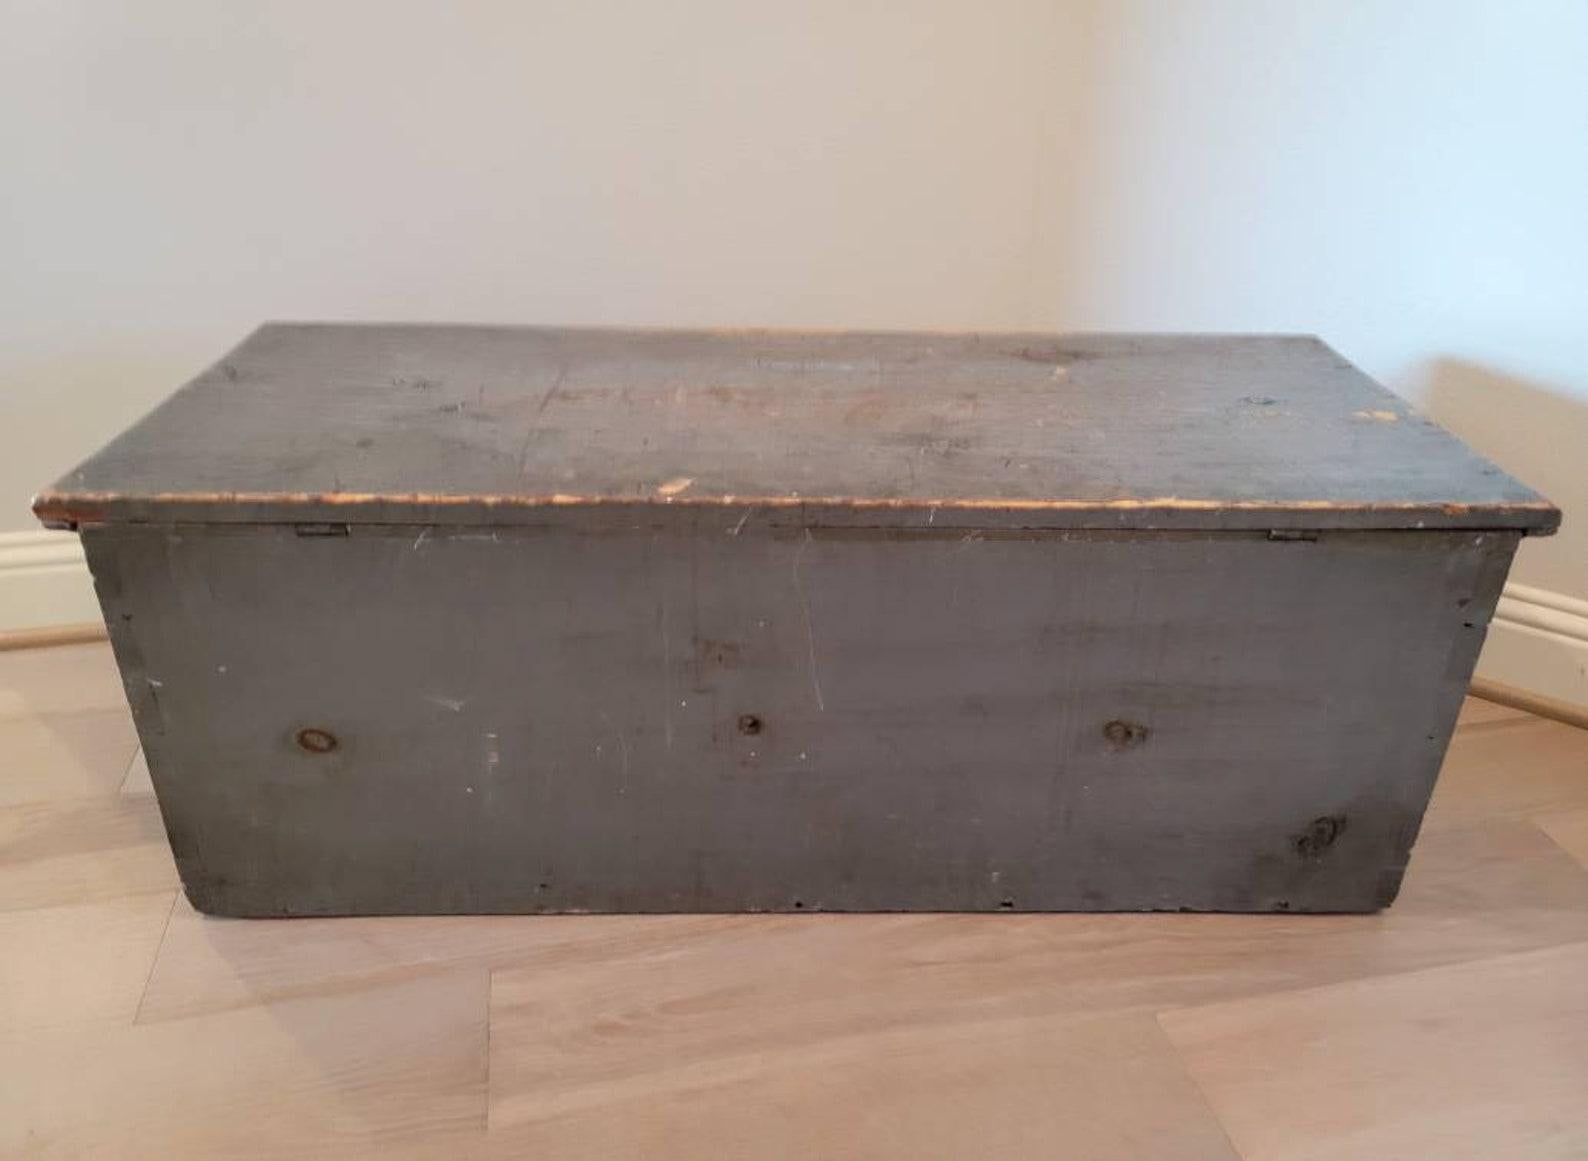 A large pine blanket chest in original slate blue / gray paint with remarkable aged distressed patina finish, hammered iron hinges, and dovetail corners.

Born in the Northeastern United States (most likey New England region) during the first half